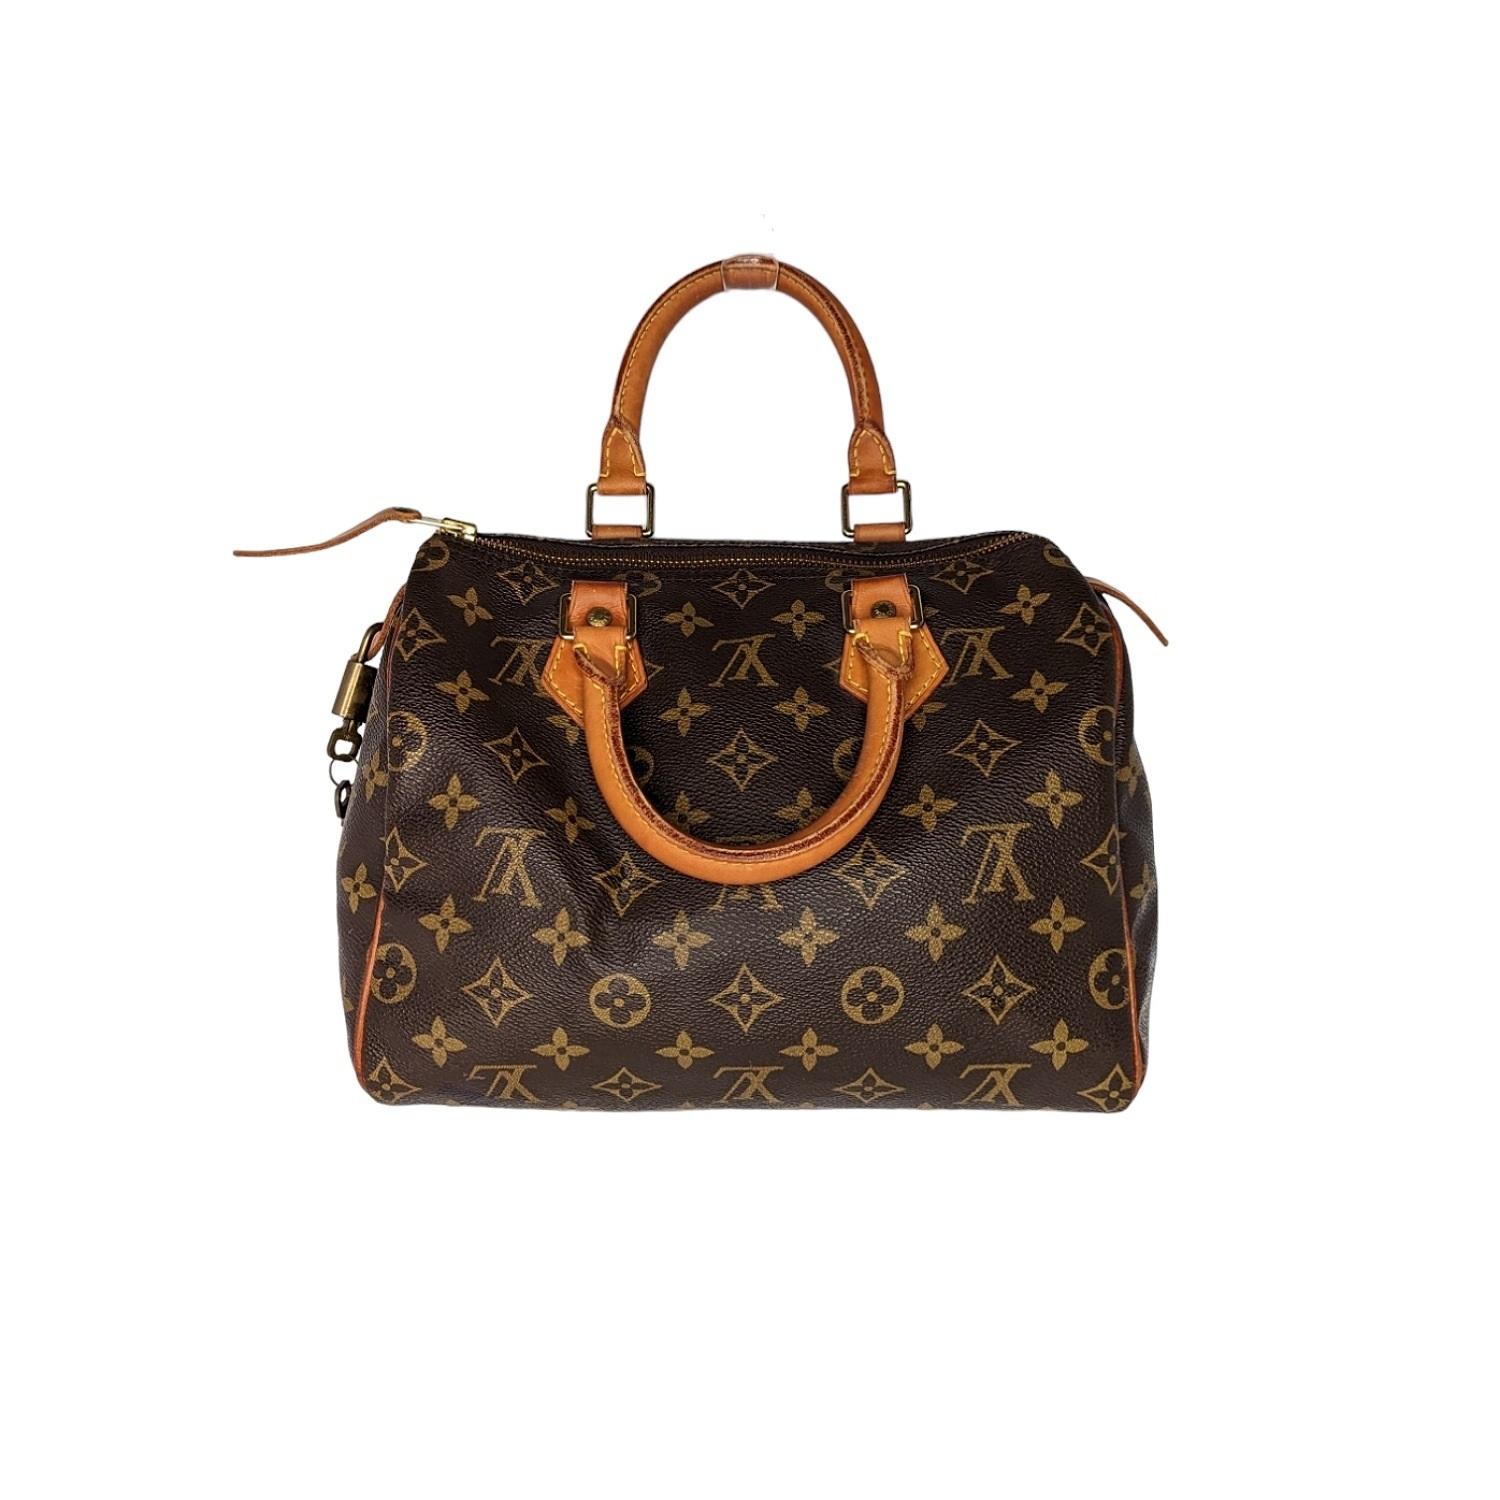 This stylish vintage speedy 25 is crafted of monogram canvas, dual rounded handles and trimmings in natural cowhide leather. Featuring a golden color metallic hardware, single zip closure opens to a spacious interior with one patch pocket. Est.